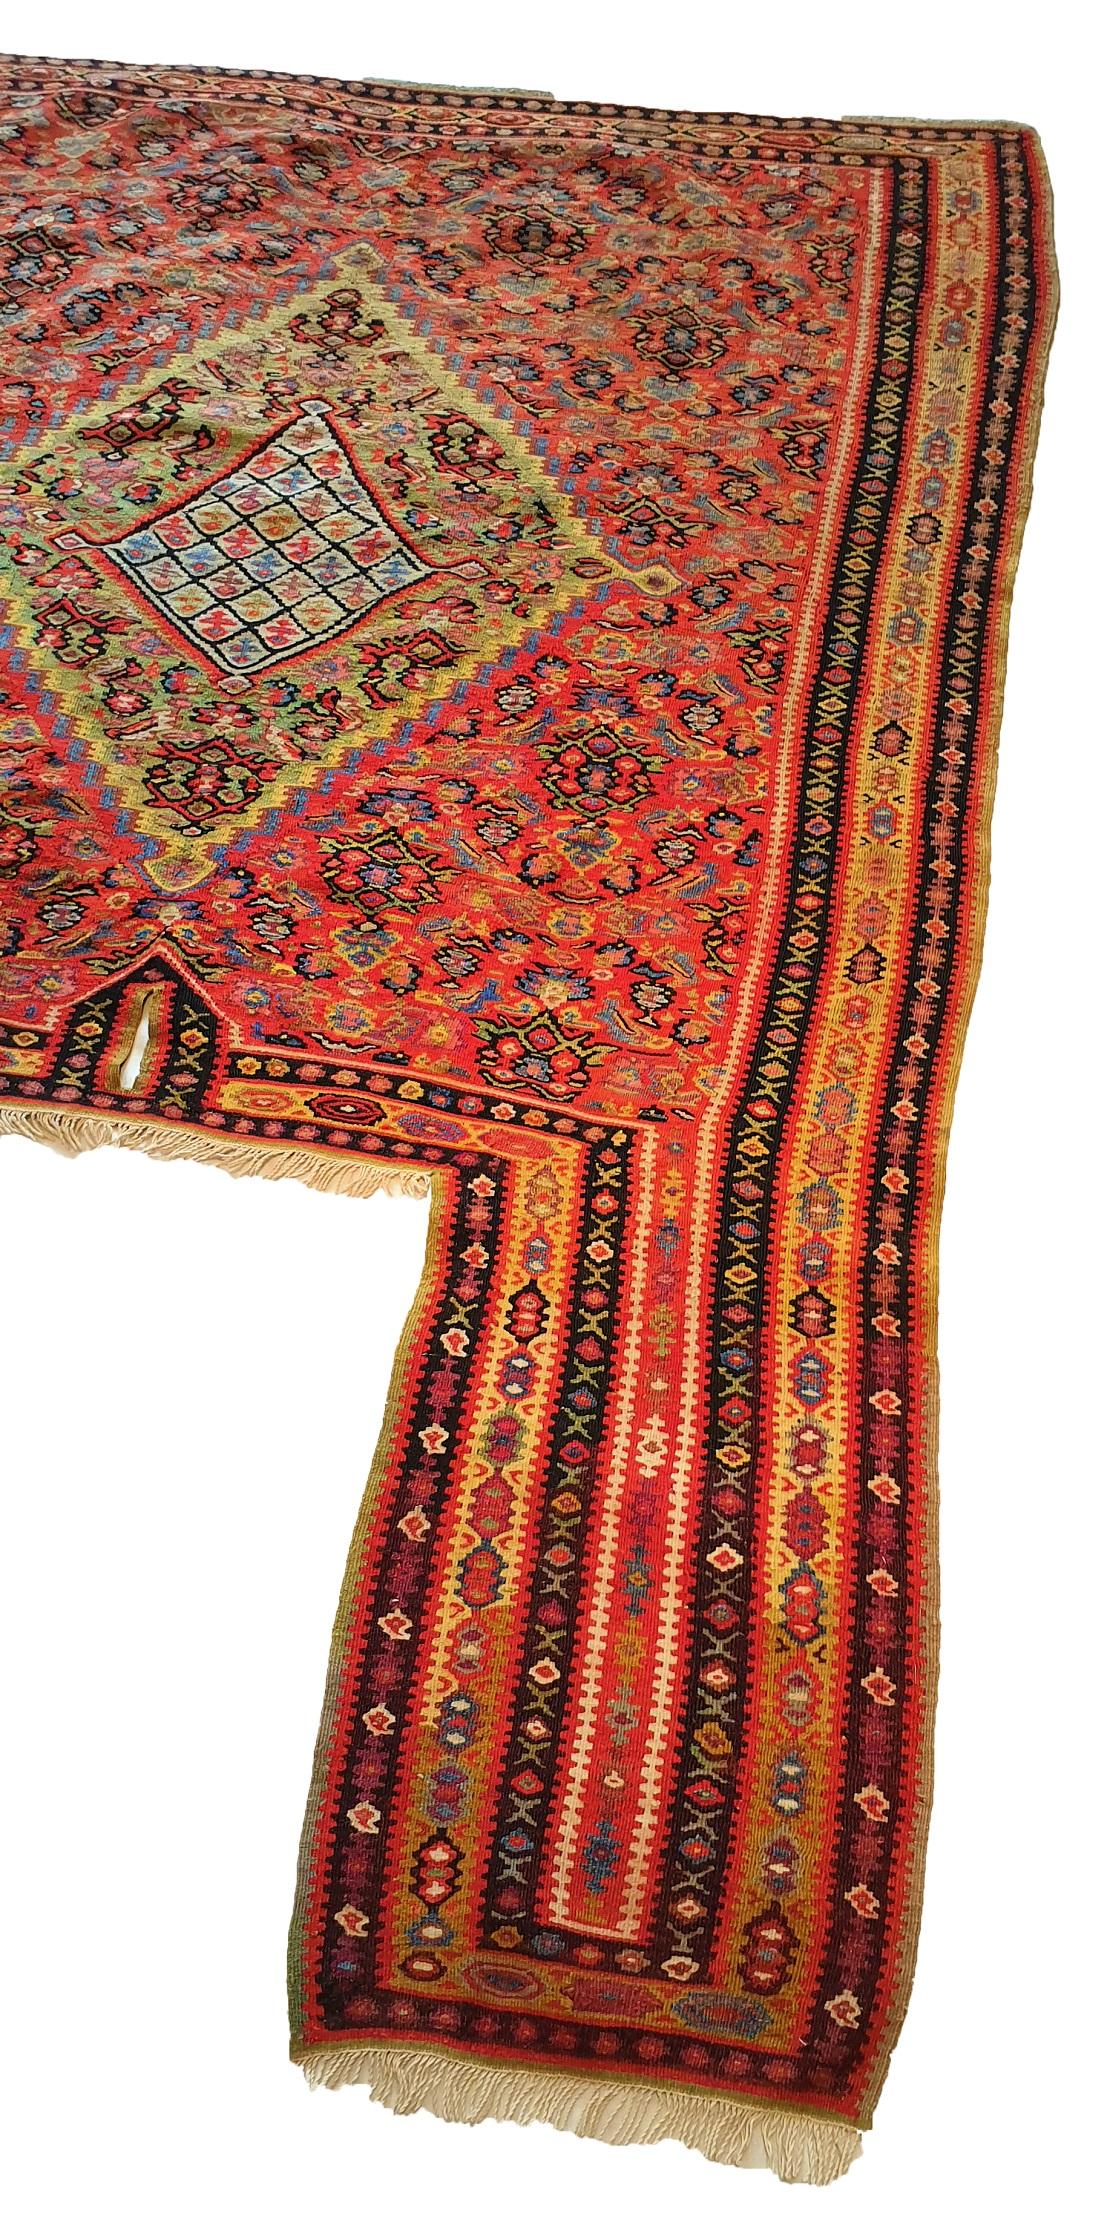 774 - Nice fine Kilim and horse saddle. End of 19th century with beautiful patterns and beautiful colors orange, green and dark blue, completely hand-woven with wool woven on cotton foundation.